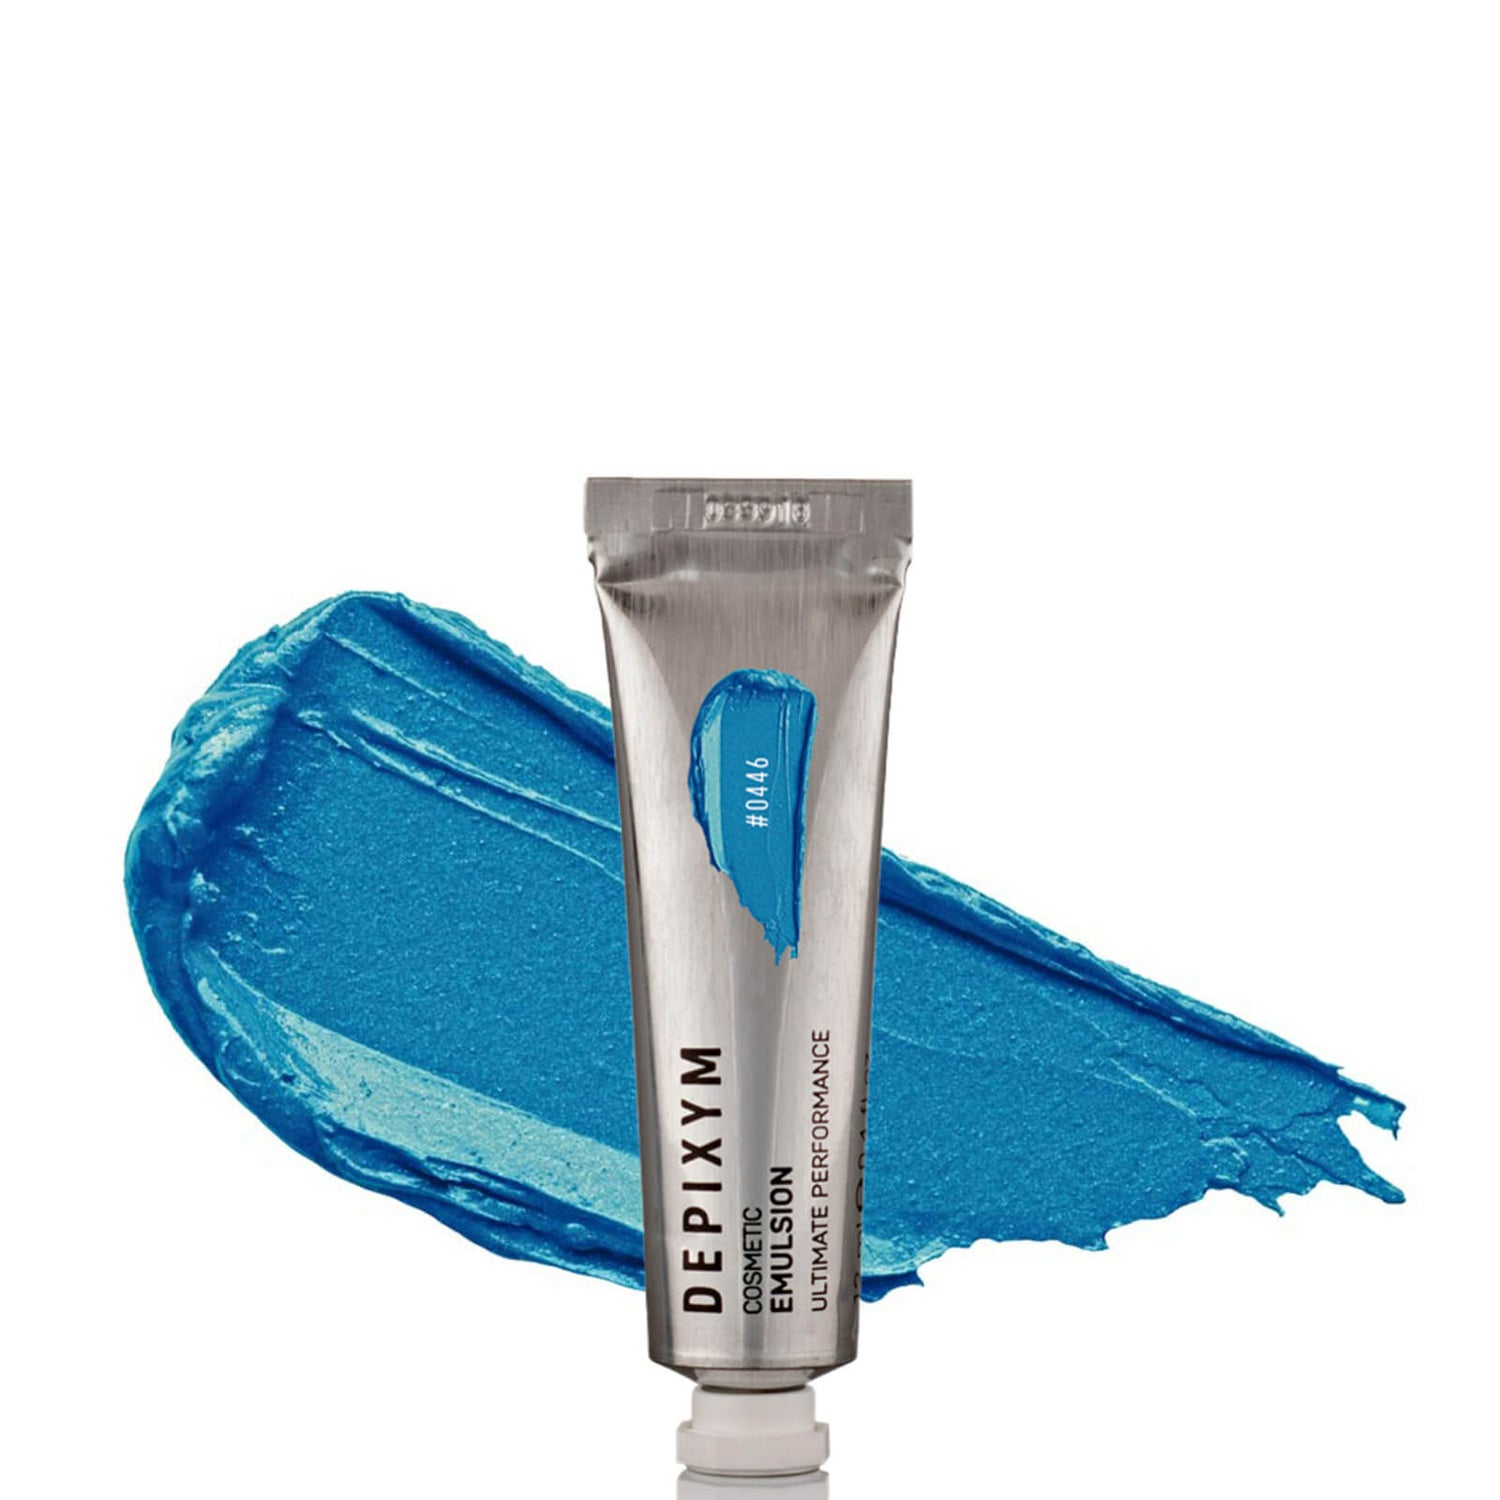 DEPIXYM Cosmetic Emulsion - #0446 Primary Blue